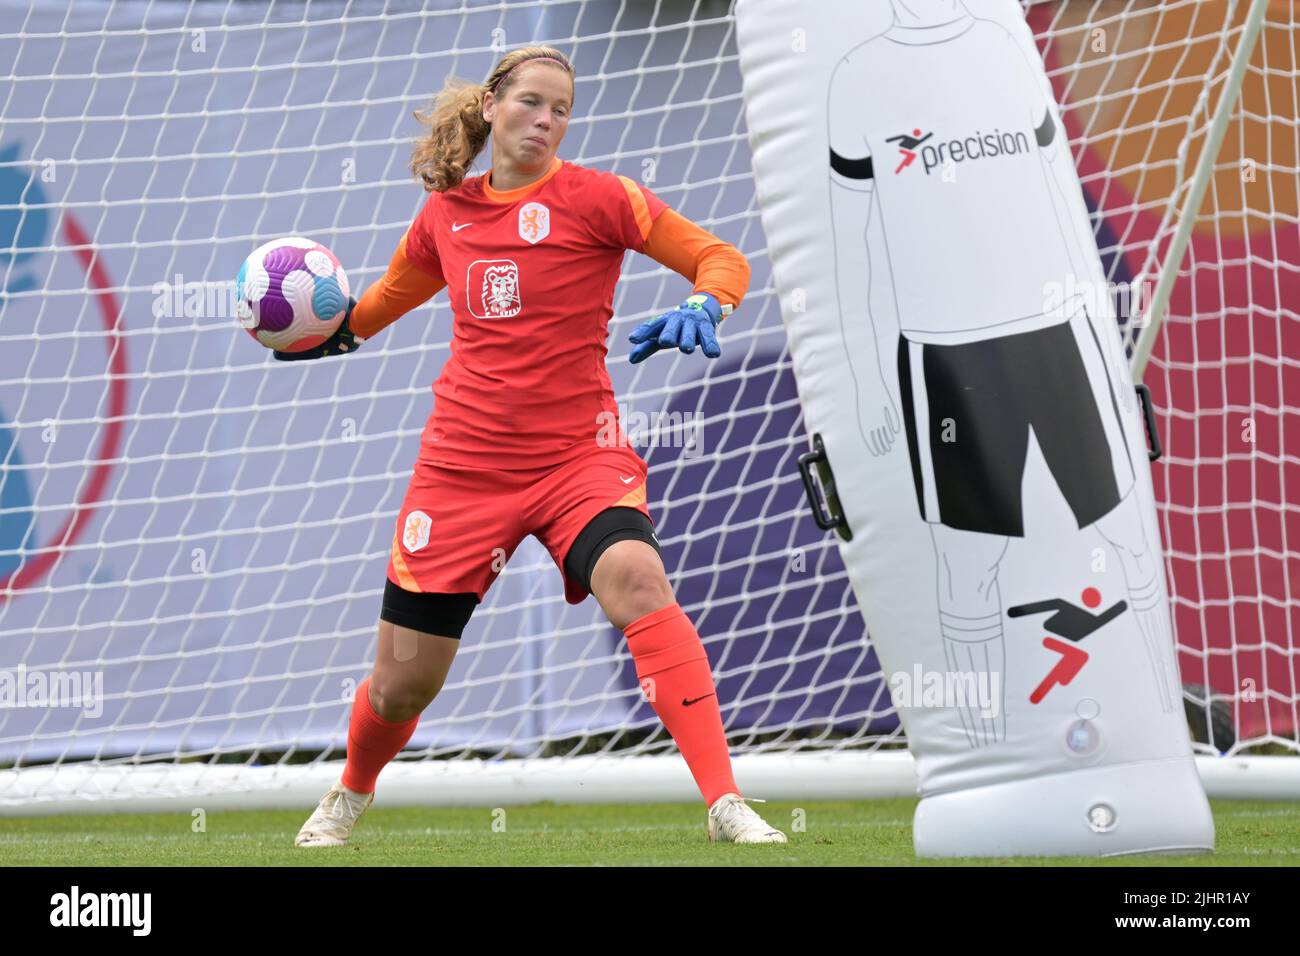 STOCKPORT - UK, 20/07/2022, Holland women goalkeeper Barbara Lorsheyd during a training session for the Netherlands Women's National Team on July 20, 2022 at Stockport County FC in Stockport prior to the UEFA Women's EURO England 2022 game against France. ANP GERRIT VAN COLOGNE Stock Photo